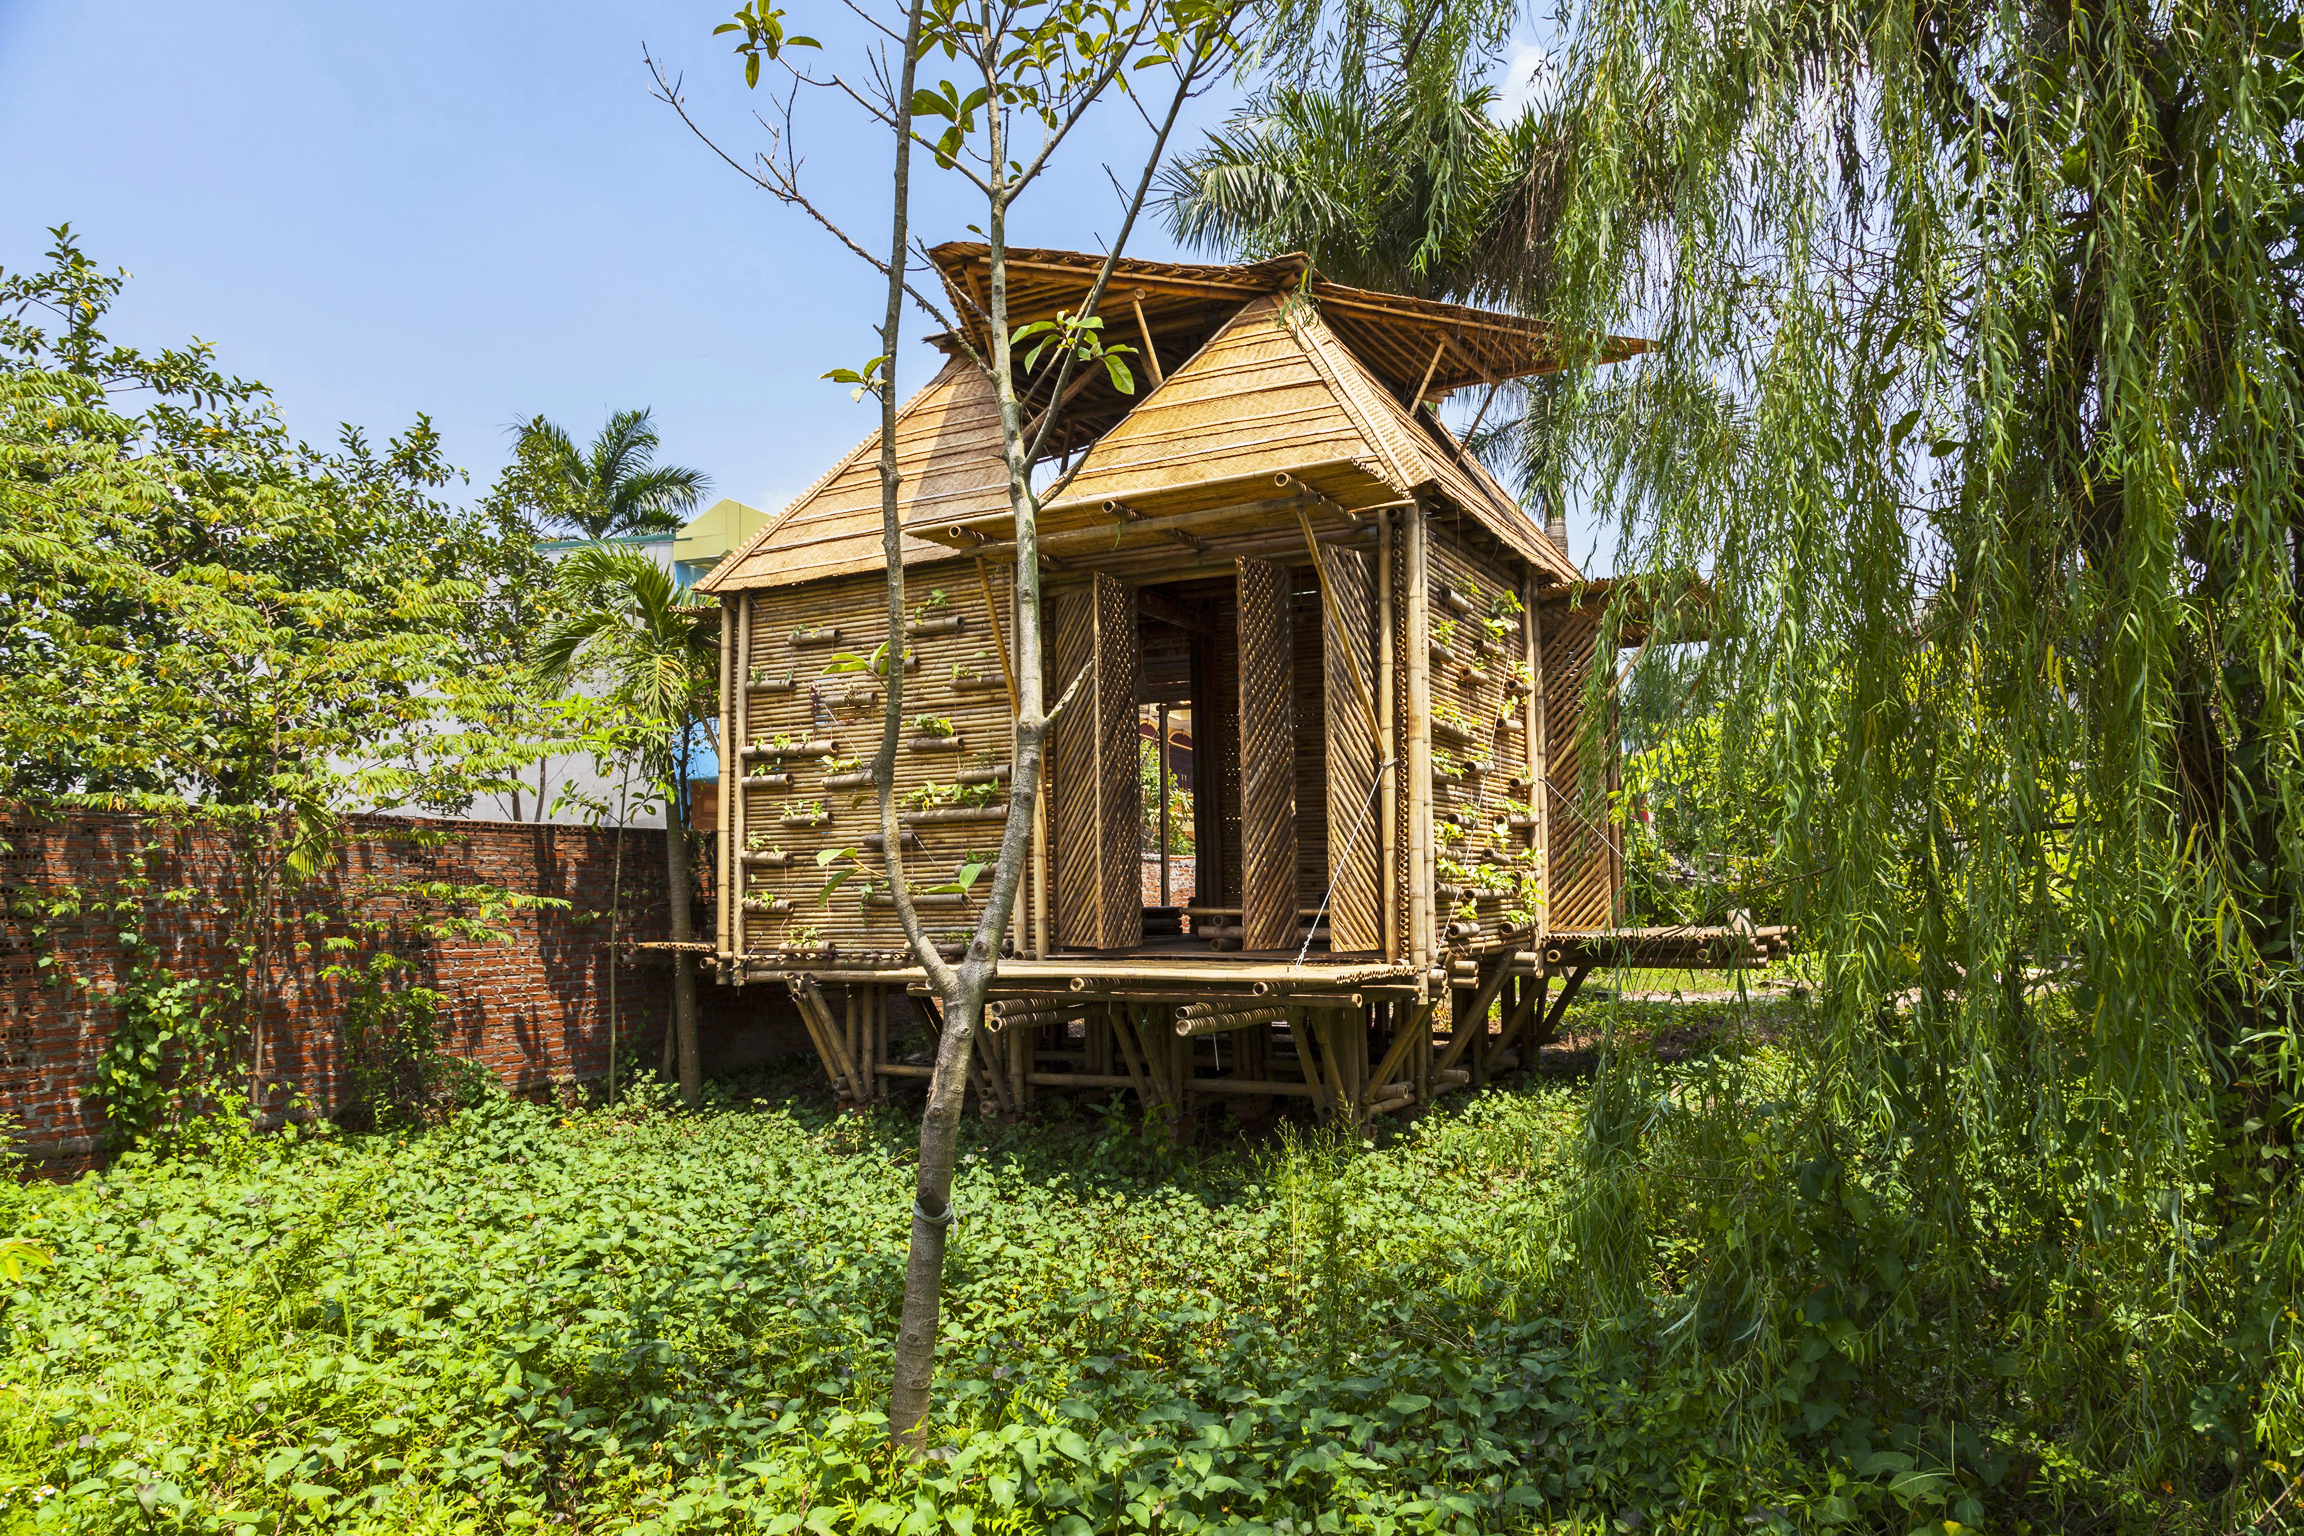 Designed by Vietnam-based H&amp;P Architects as an affordable concept home for villagers in some of the country’s most flood-prone ­regions—it costs just $2,500 to build—the Blooming Bamboo Home's bottom layer can be filled with reused oil drums that allow it to float in wet conditions, while steel beams keep it anchored.